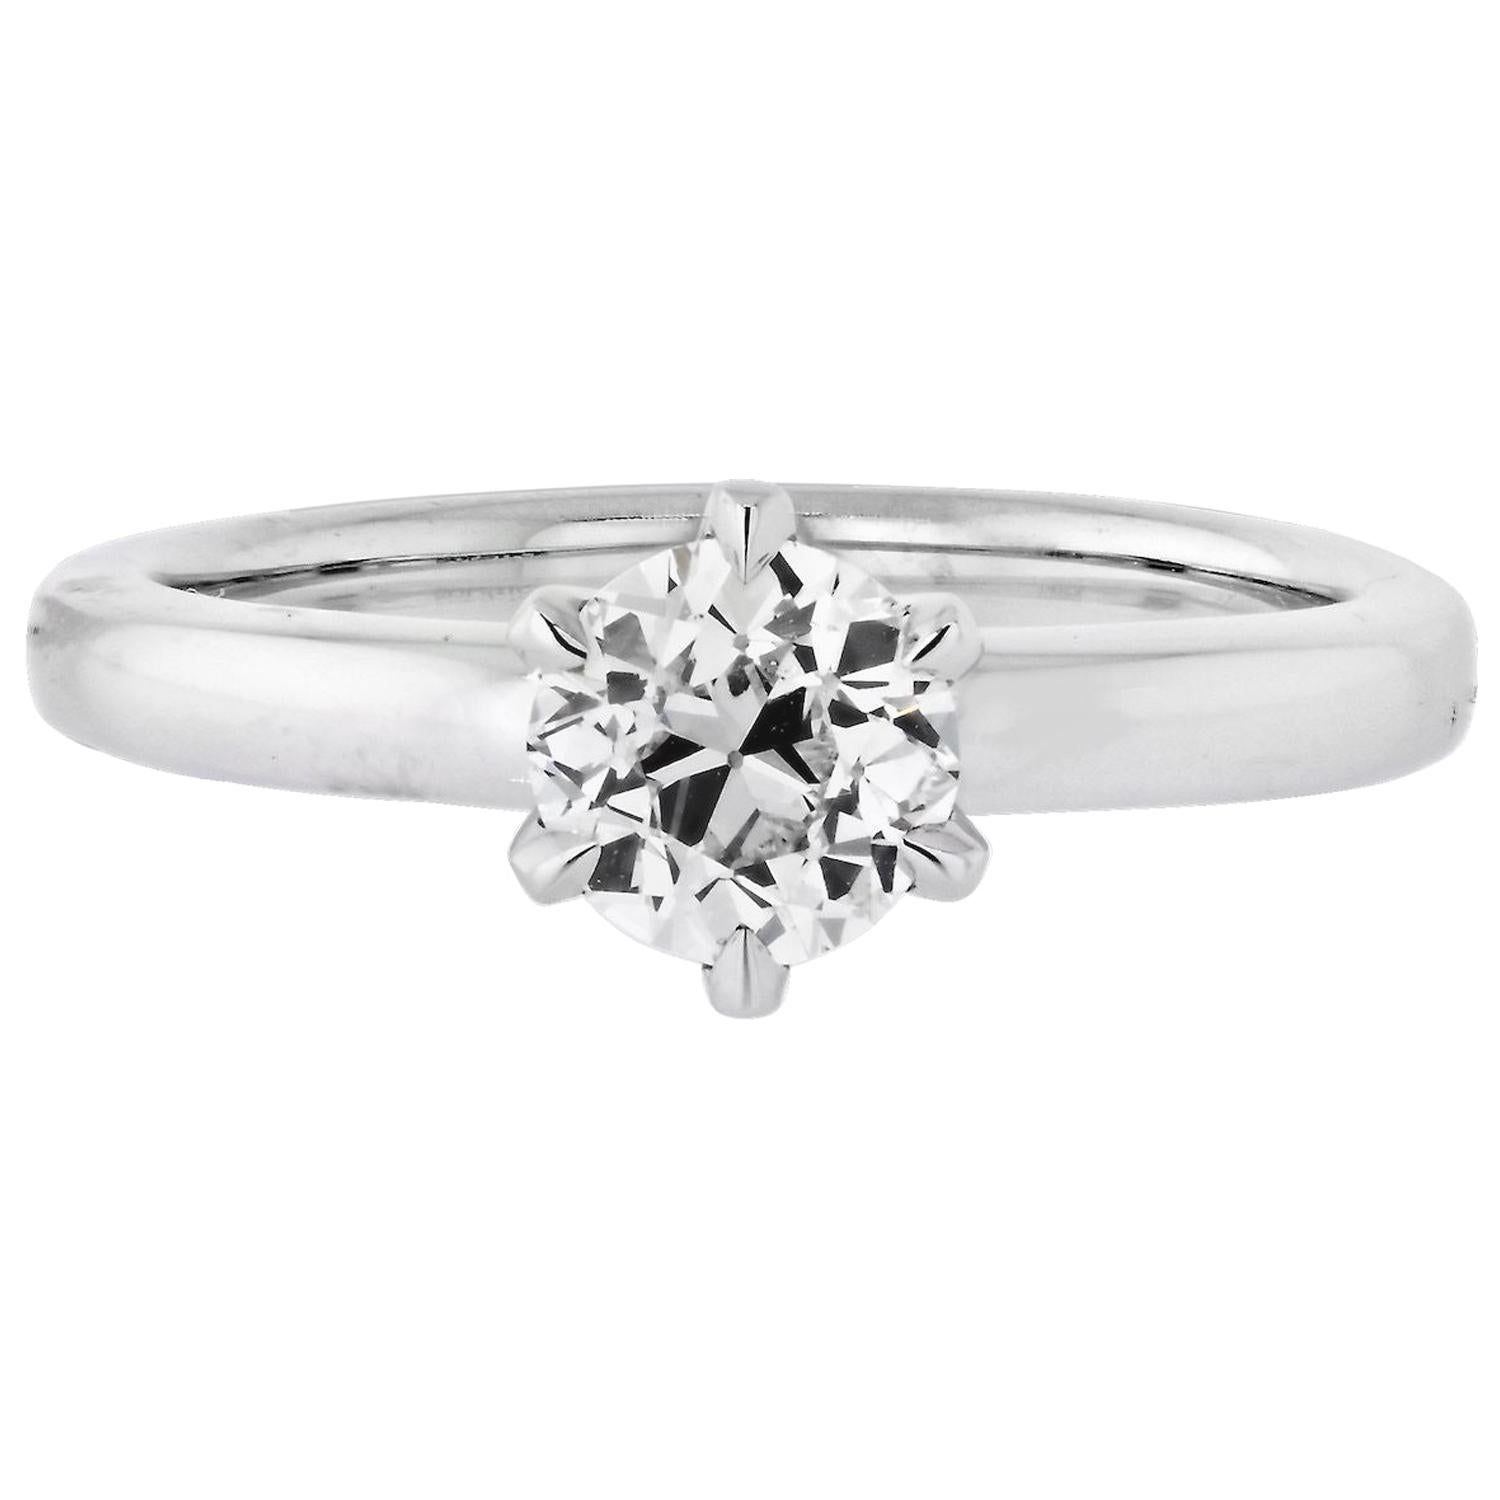 1.02 Carat Old European Cut Diamond G/VS2 GIA Solitaire Engagement Ring For Sale